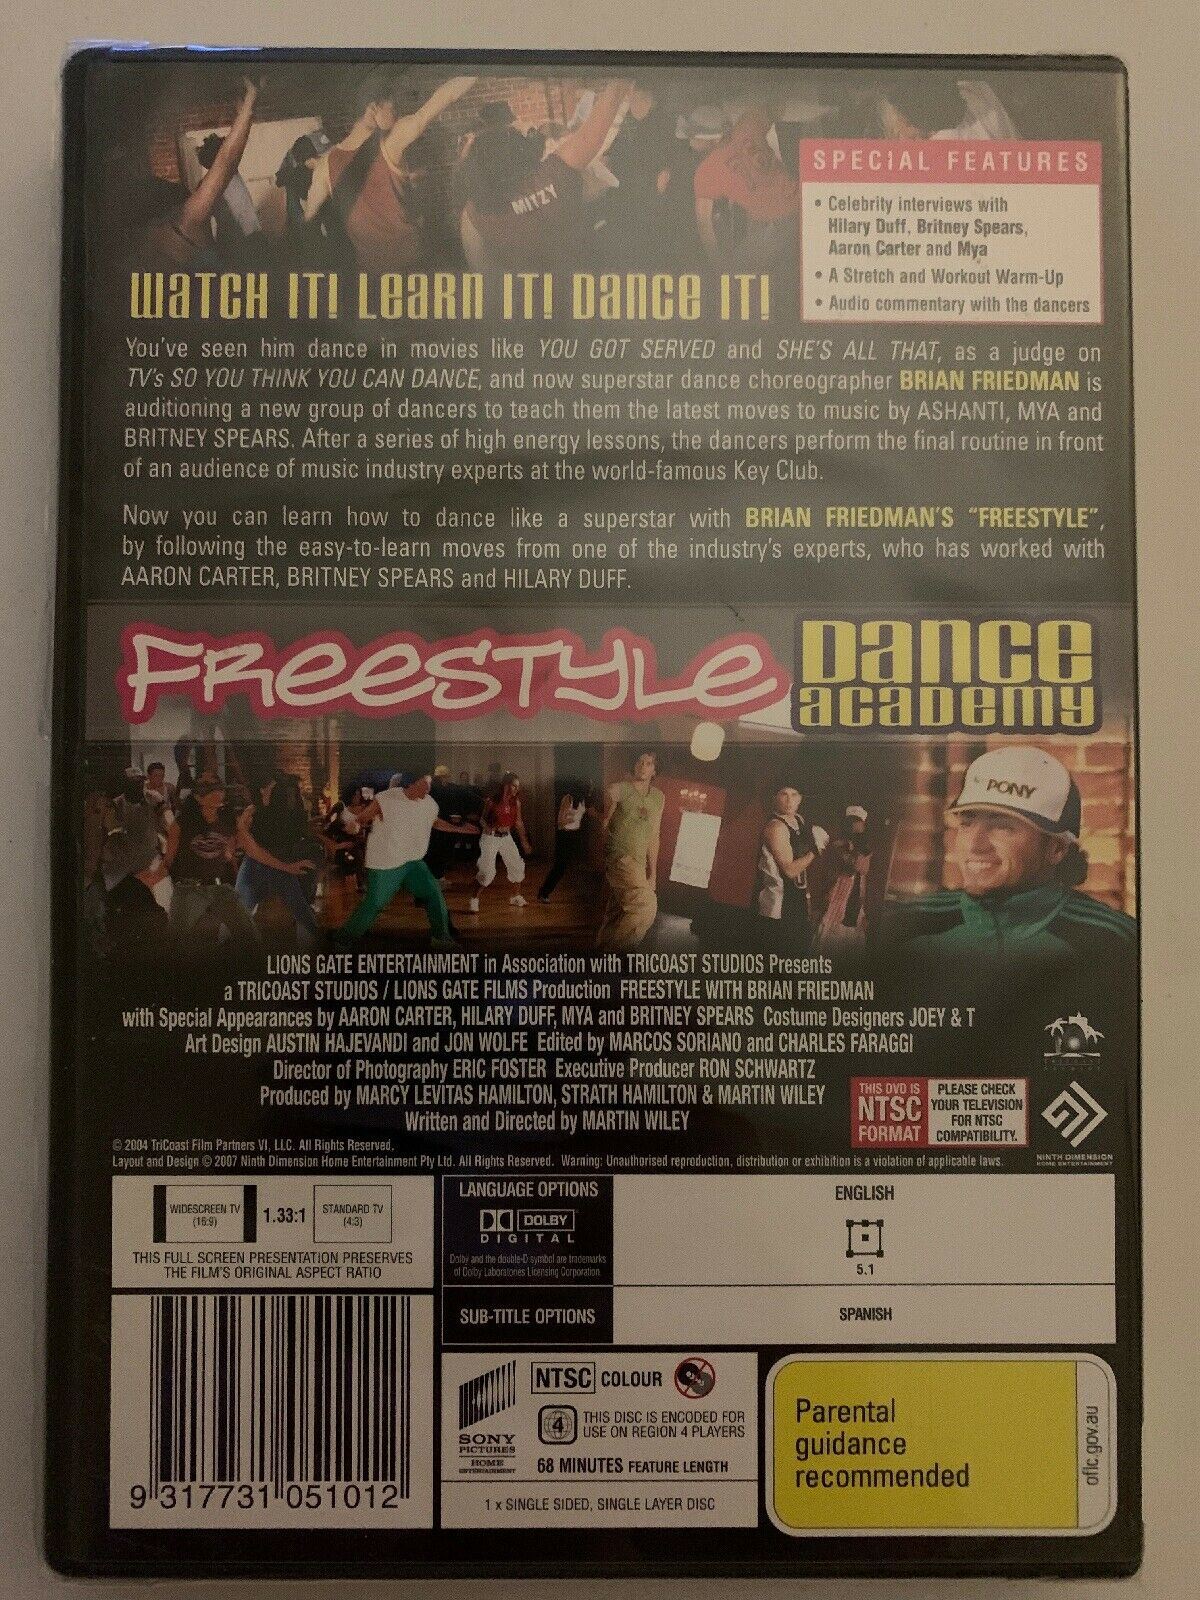 Freestyle - Dance Academy (DVD, 2007) BRAND NEW SEALED - Brittany Spears, H Duff